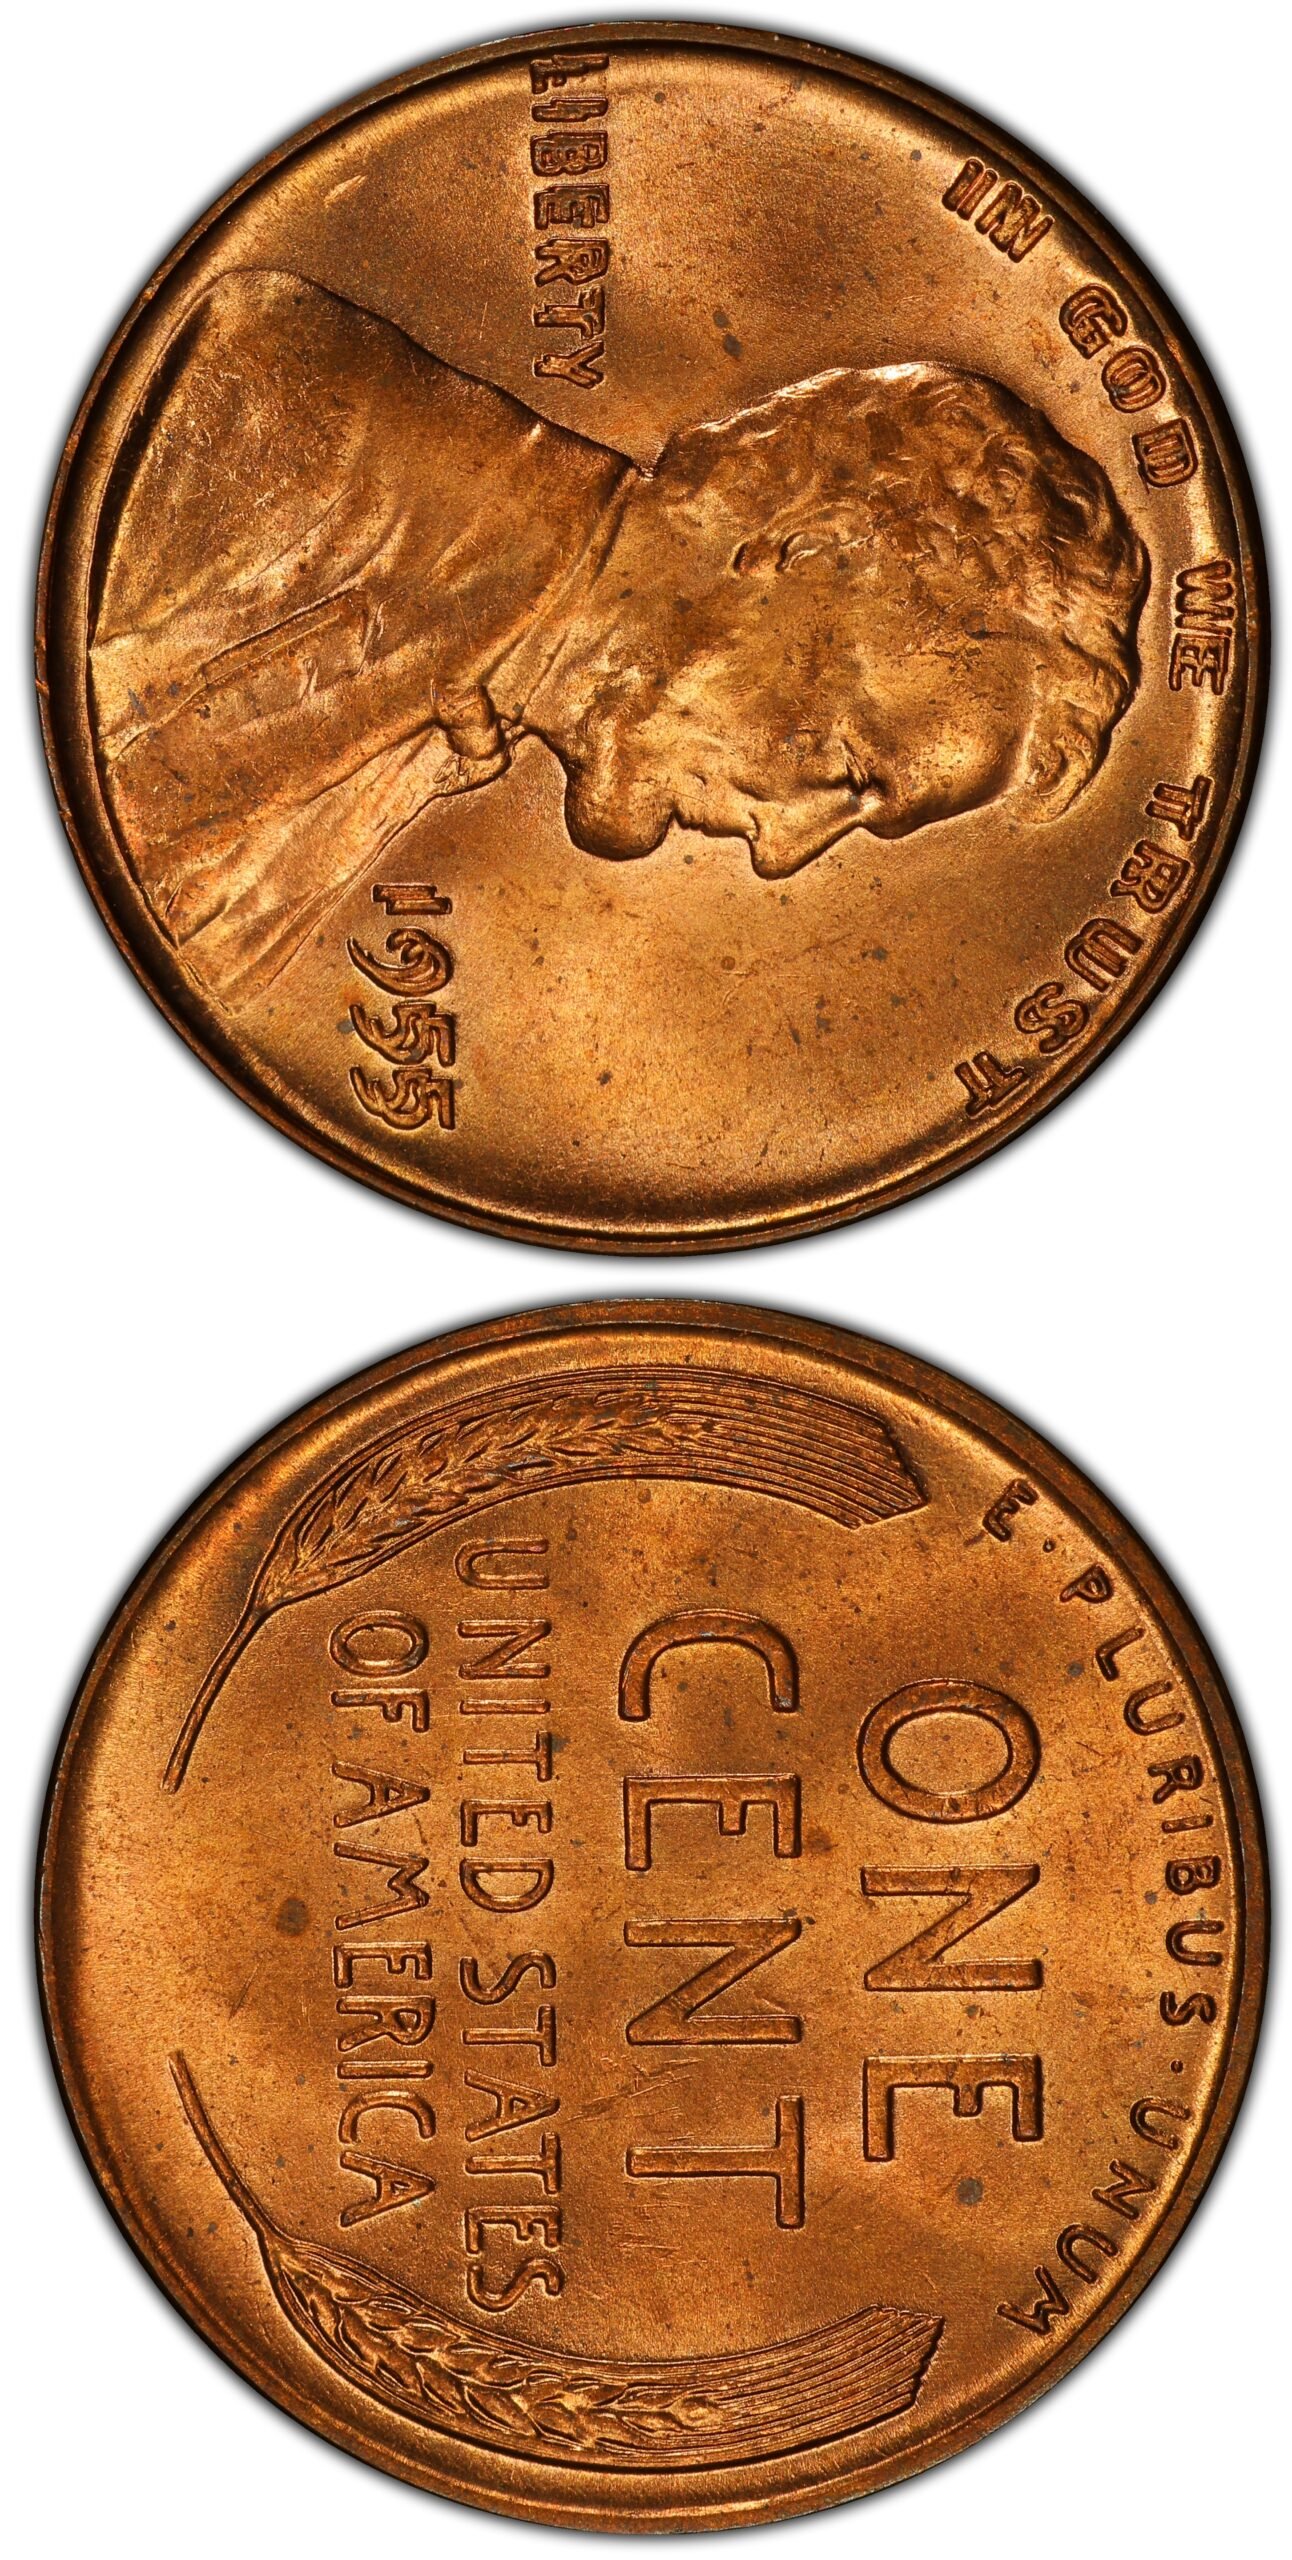 14 valuable coins that could be hiding in your change